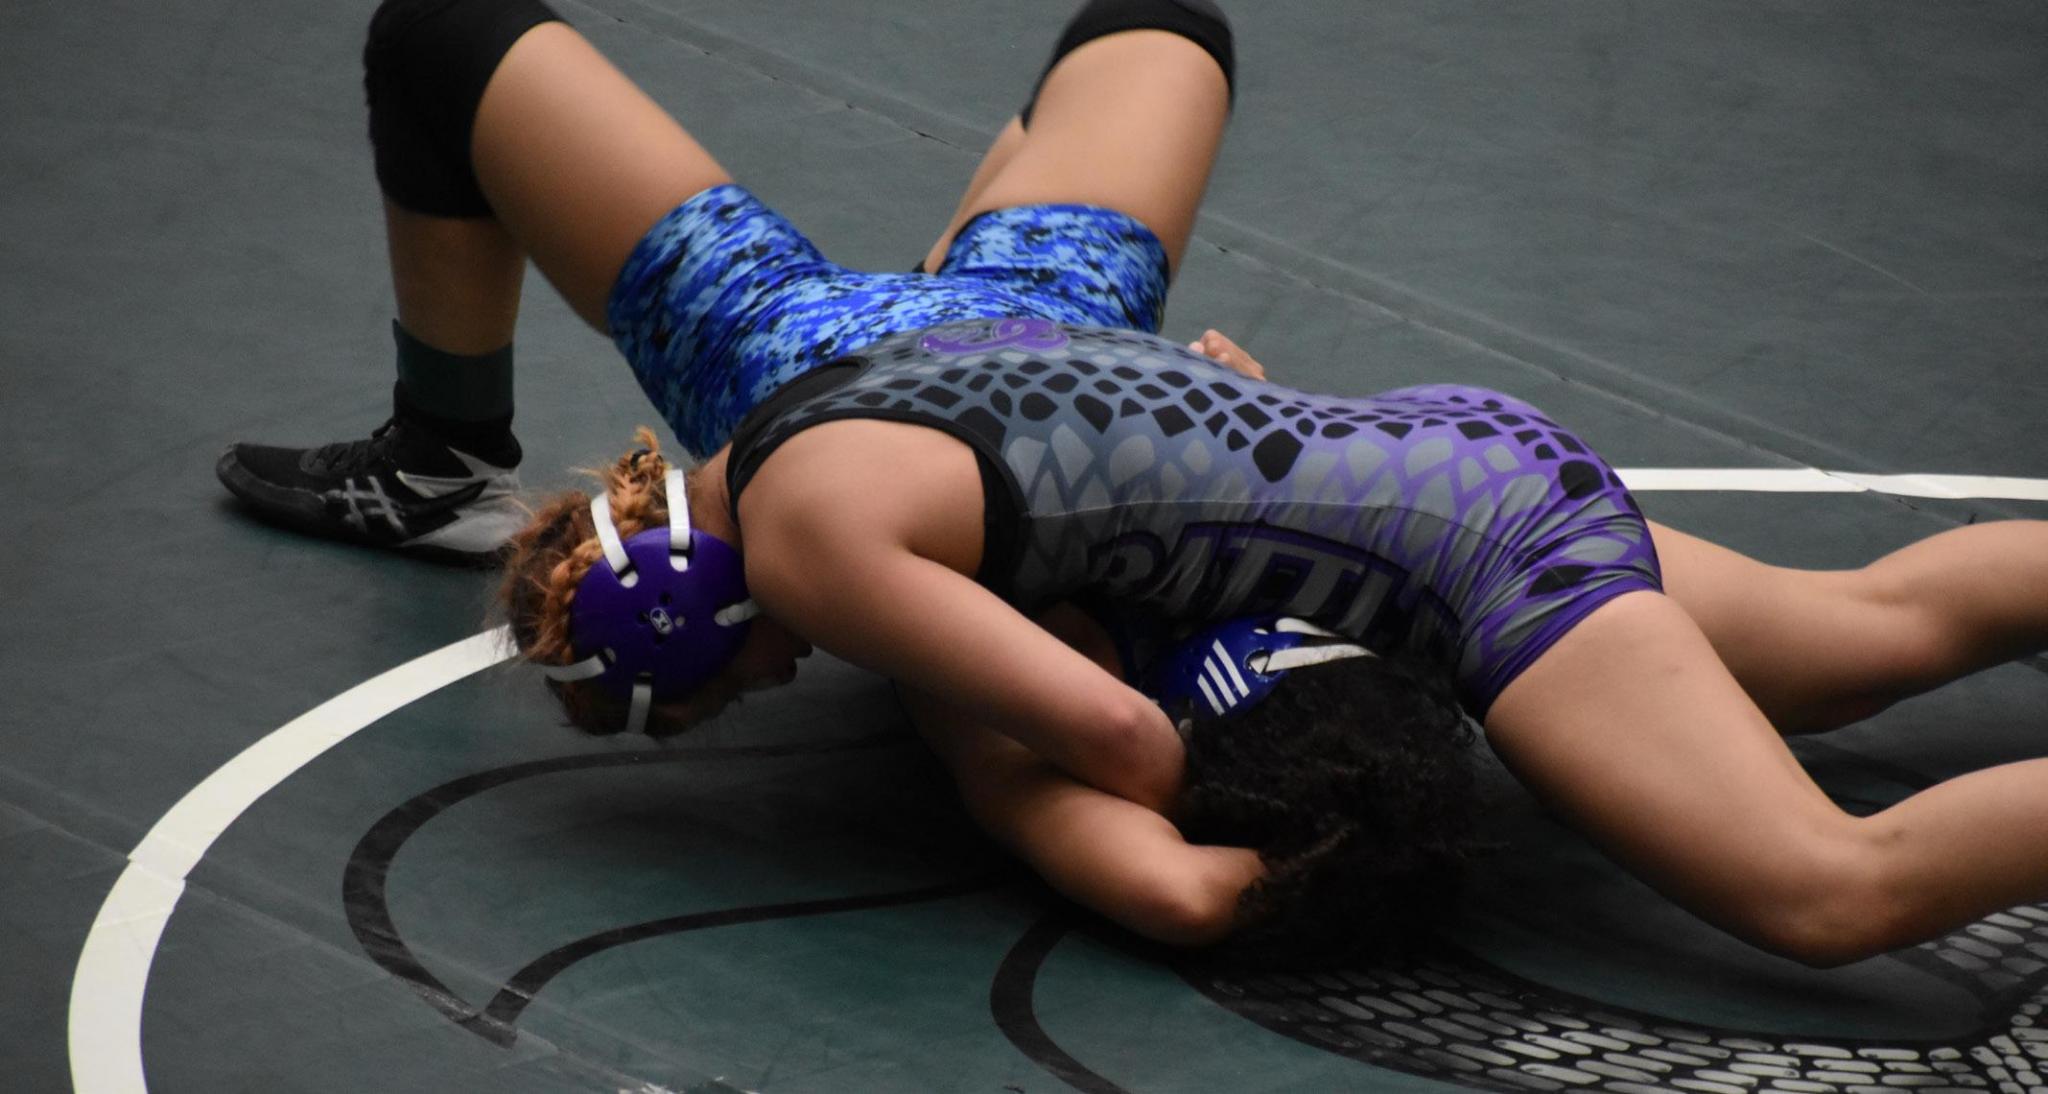 Three Rattler wrestlers look to medal at state tournament San Marcos Record